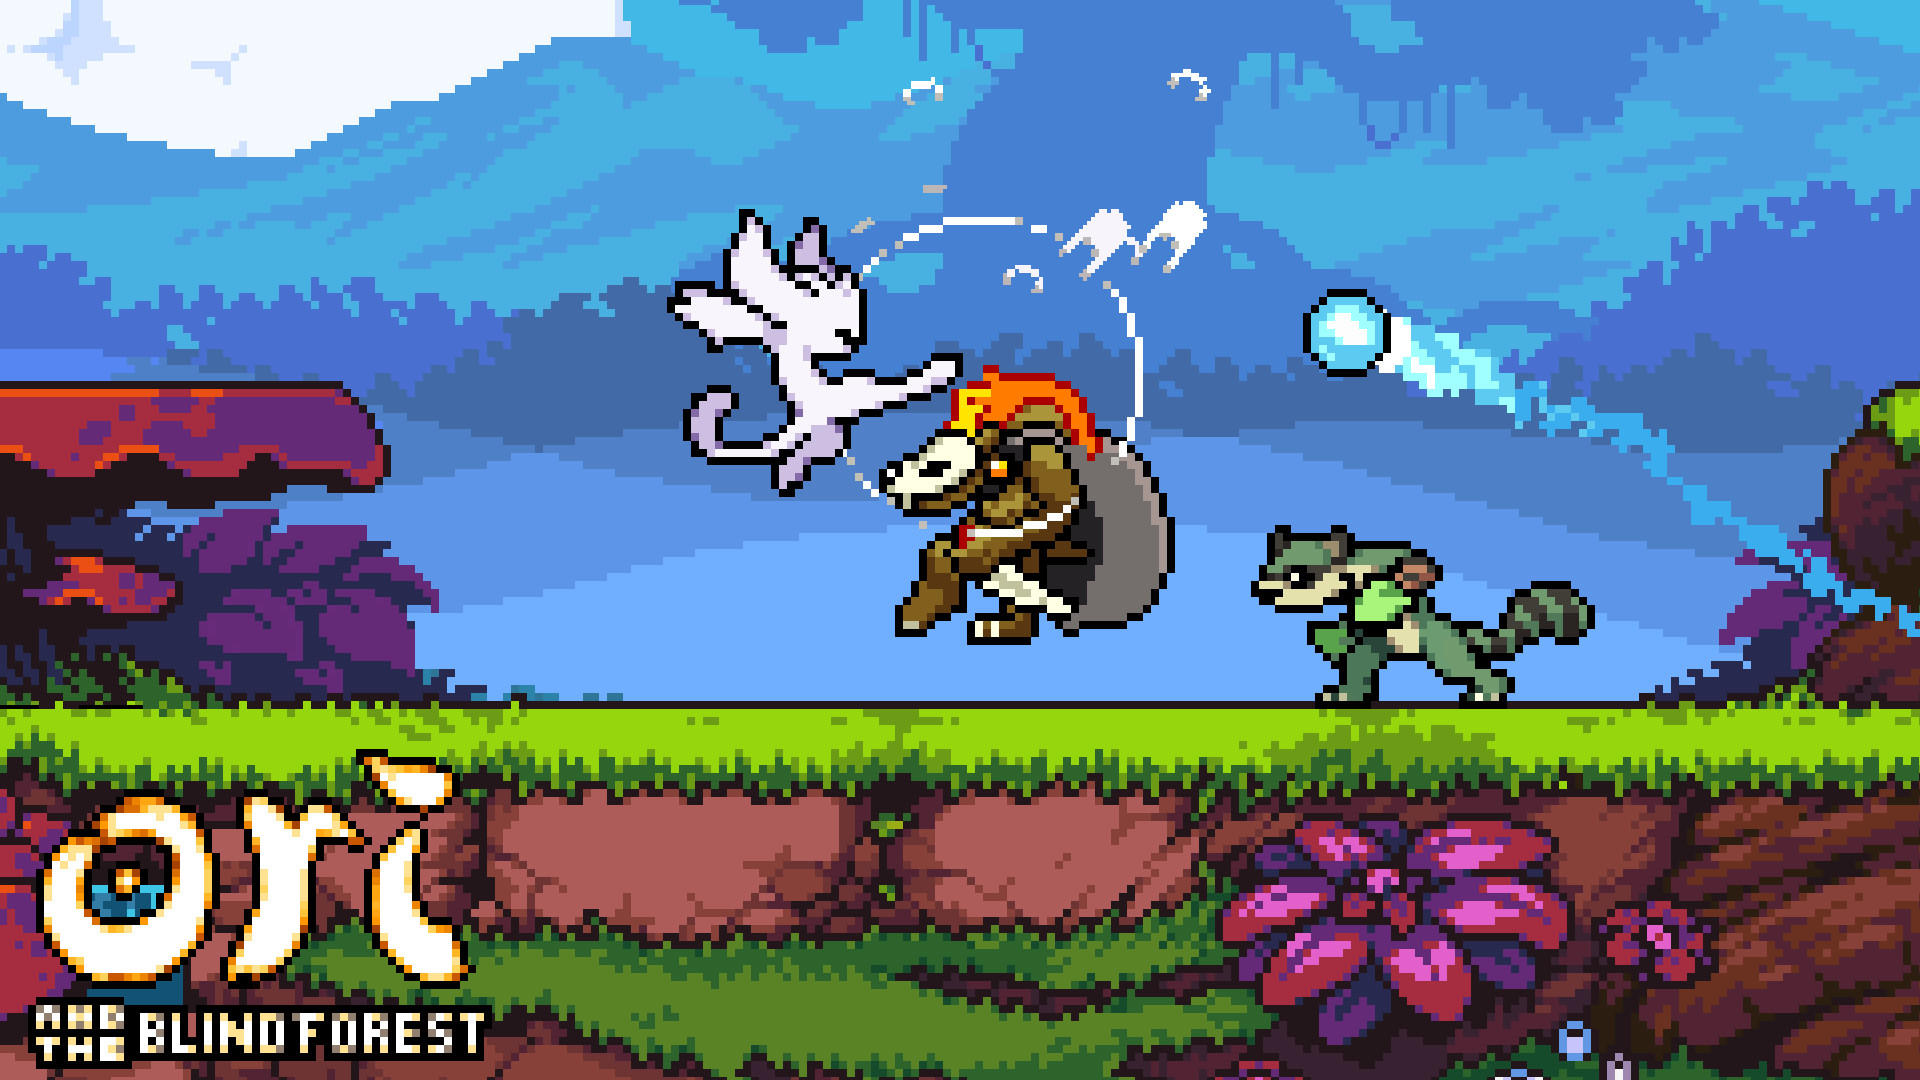 Rivals of Aether 게임 스크린 샷